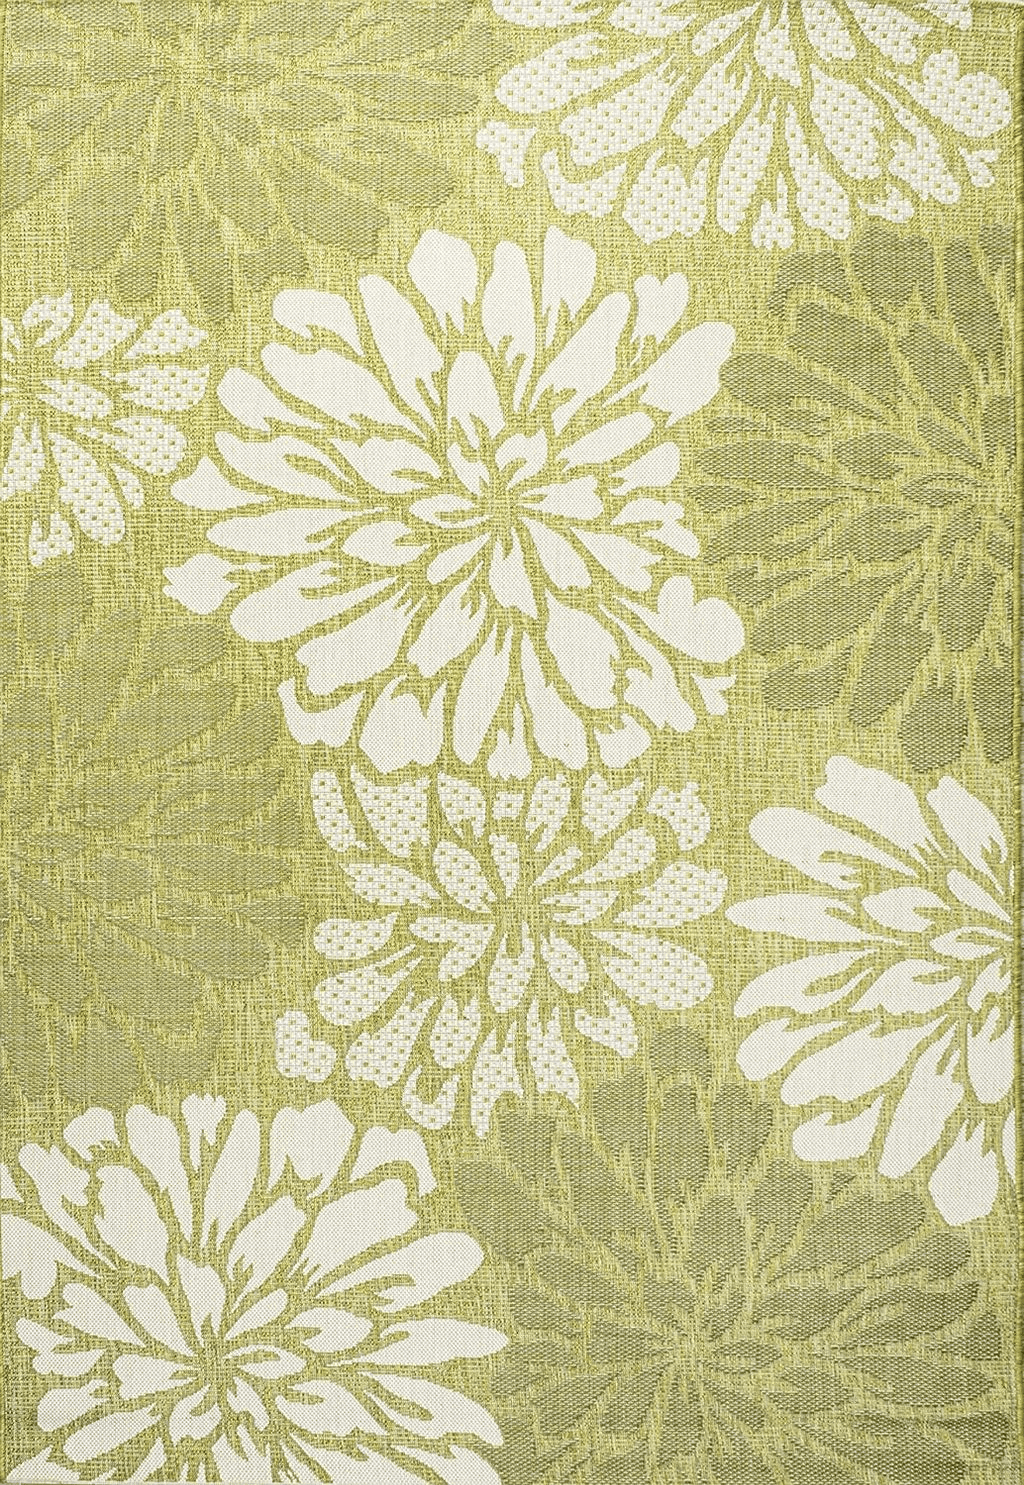 9x12 Eyely BMS110H-9 Santa Monica Zinnia Modern Floral Textured Weave Indoor/Outdoor Area Rug Coastal;Glam, Bedroom, Backyard, Patio, Easy-Cleaning, Non-Shedding, 9 X 12, Green/Cream